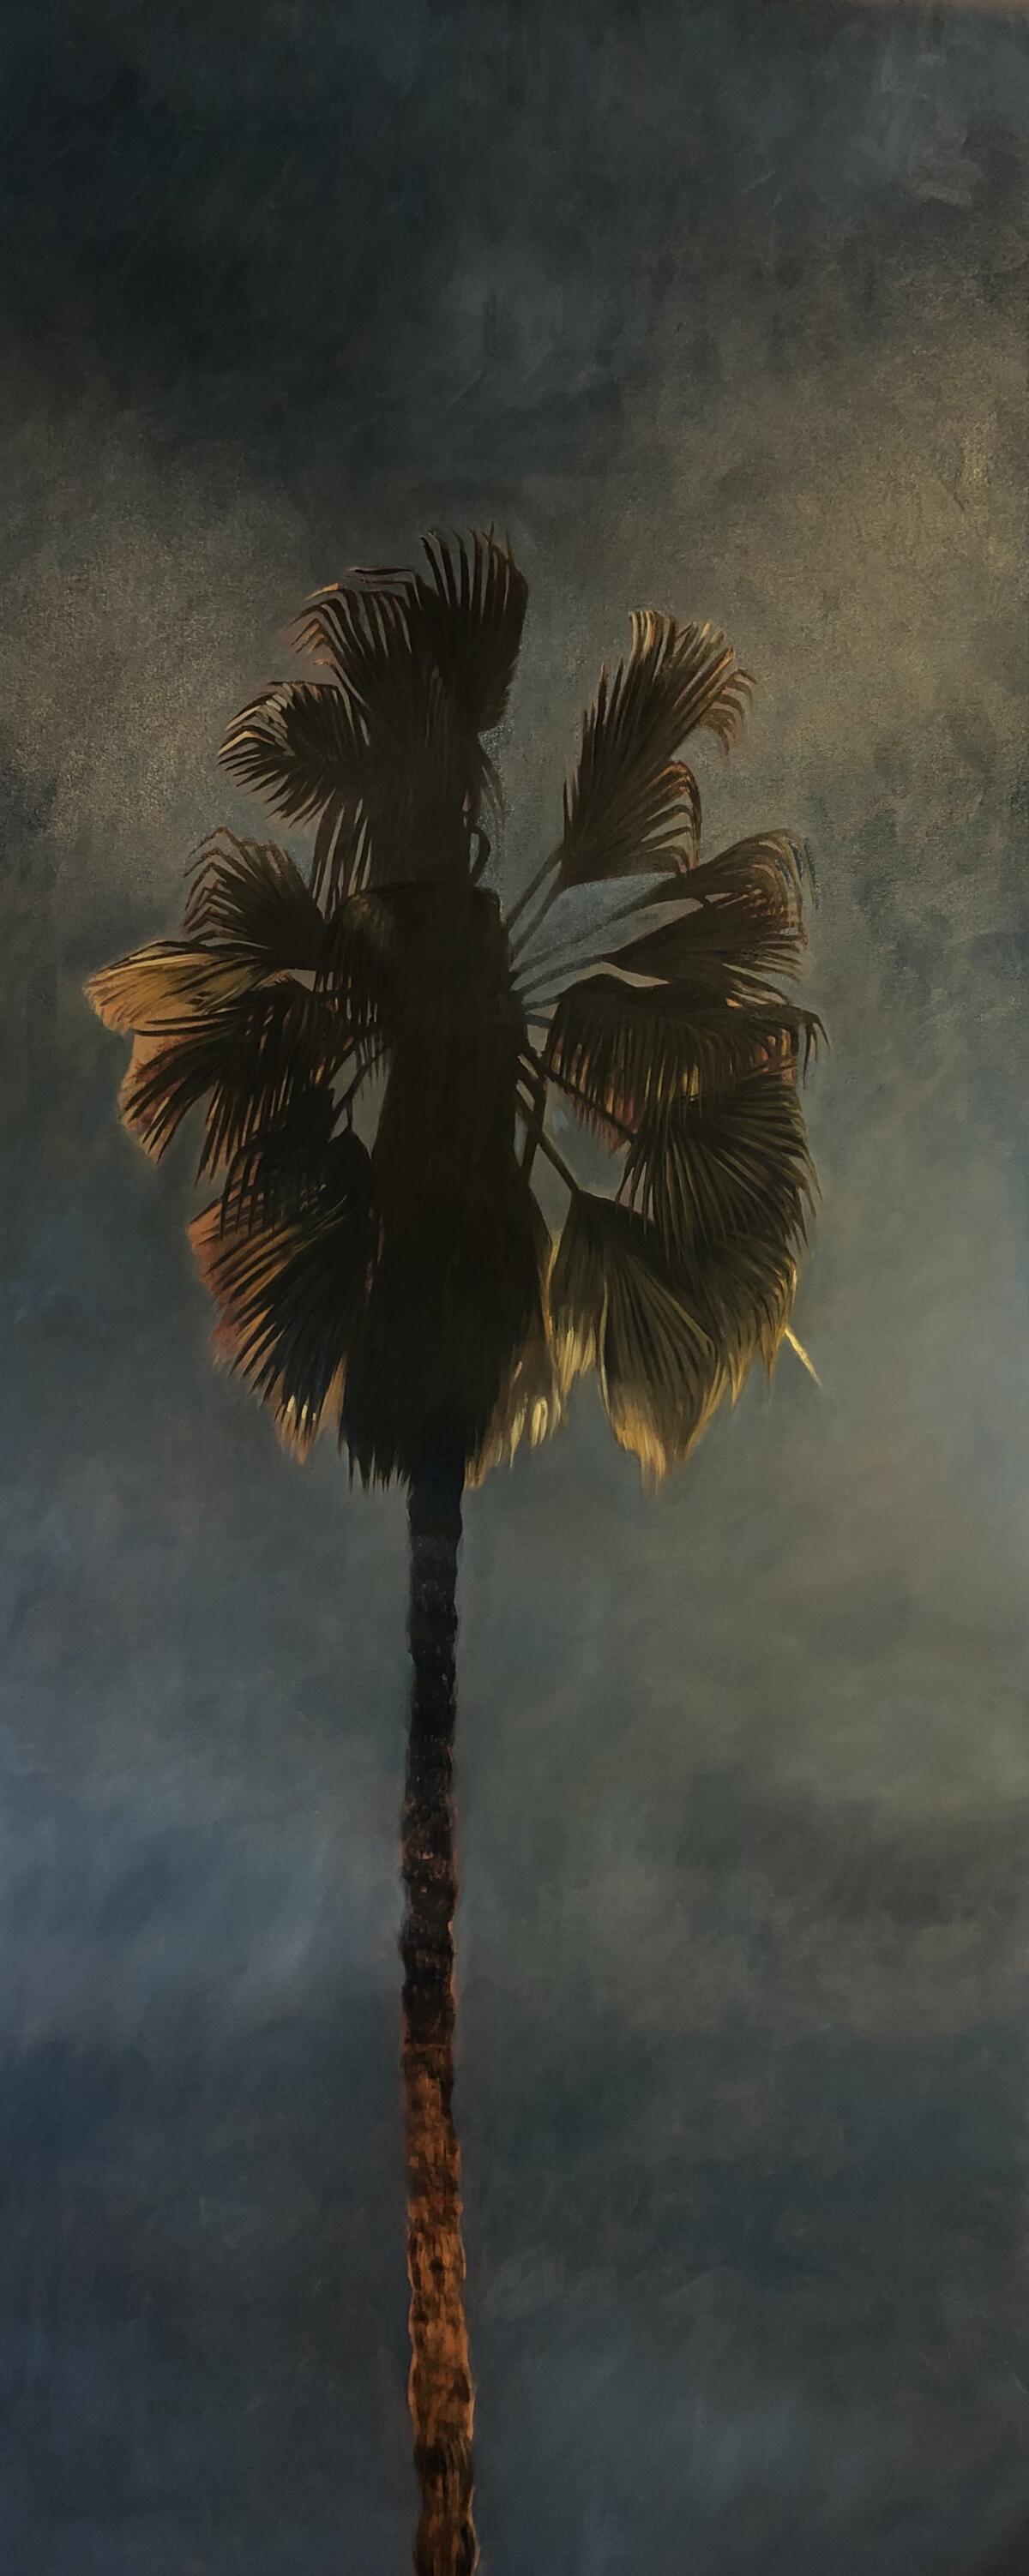 Palm Tree at Sunset by Perry Vásquez